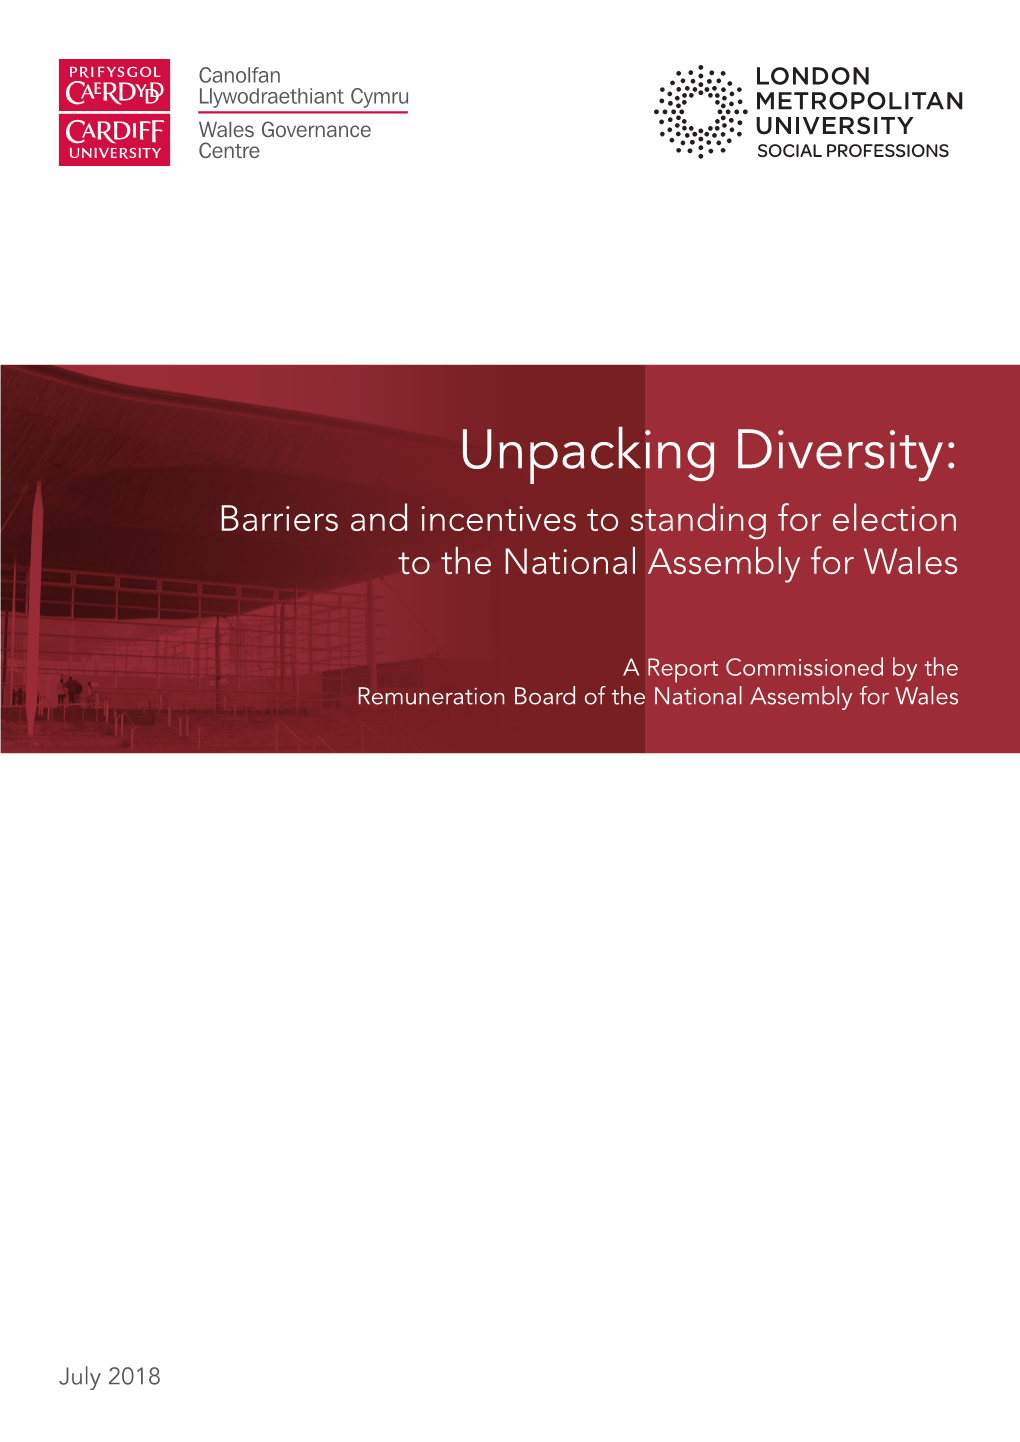 Unpacking Diversity: Barriers and Incentives to Standing for Election to the National Assembly for Wales